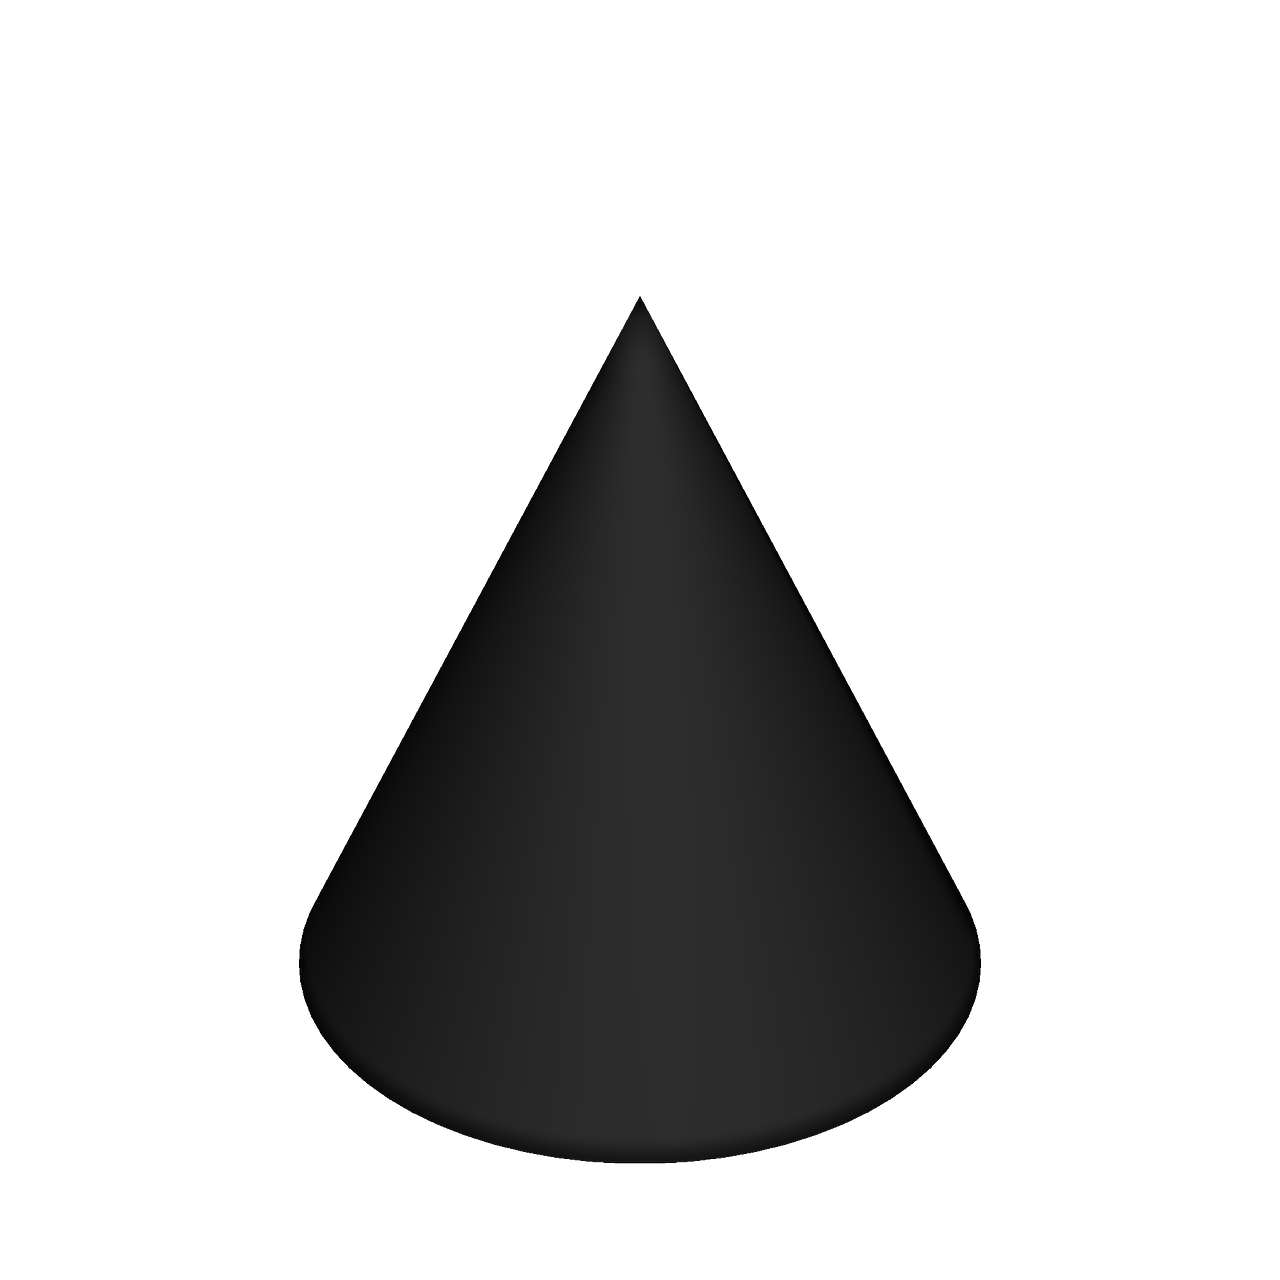 Cone,cone-shaped,shape,3d,black - free image from